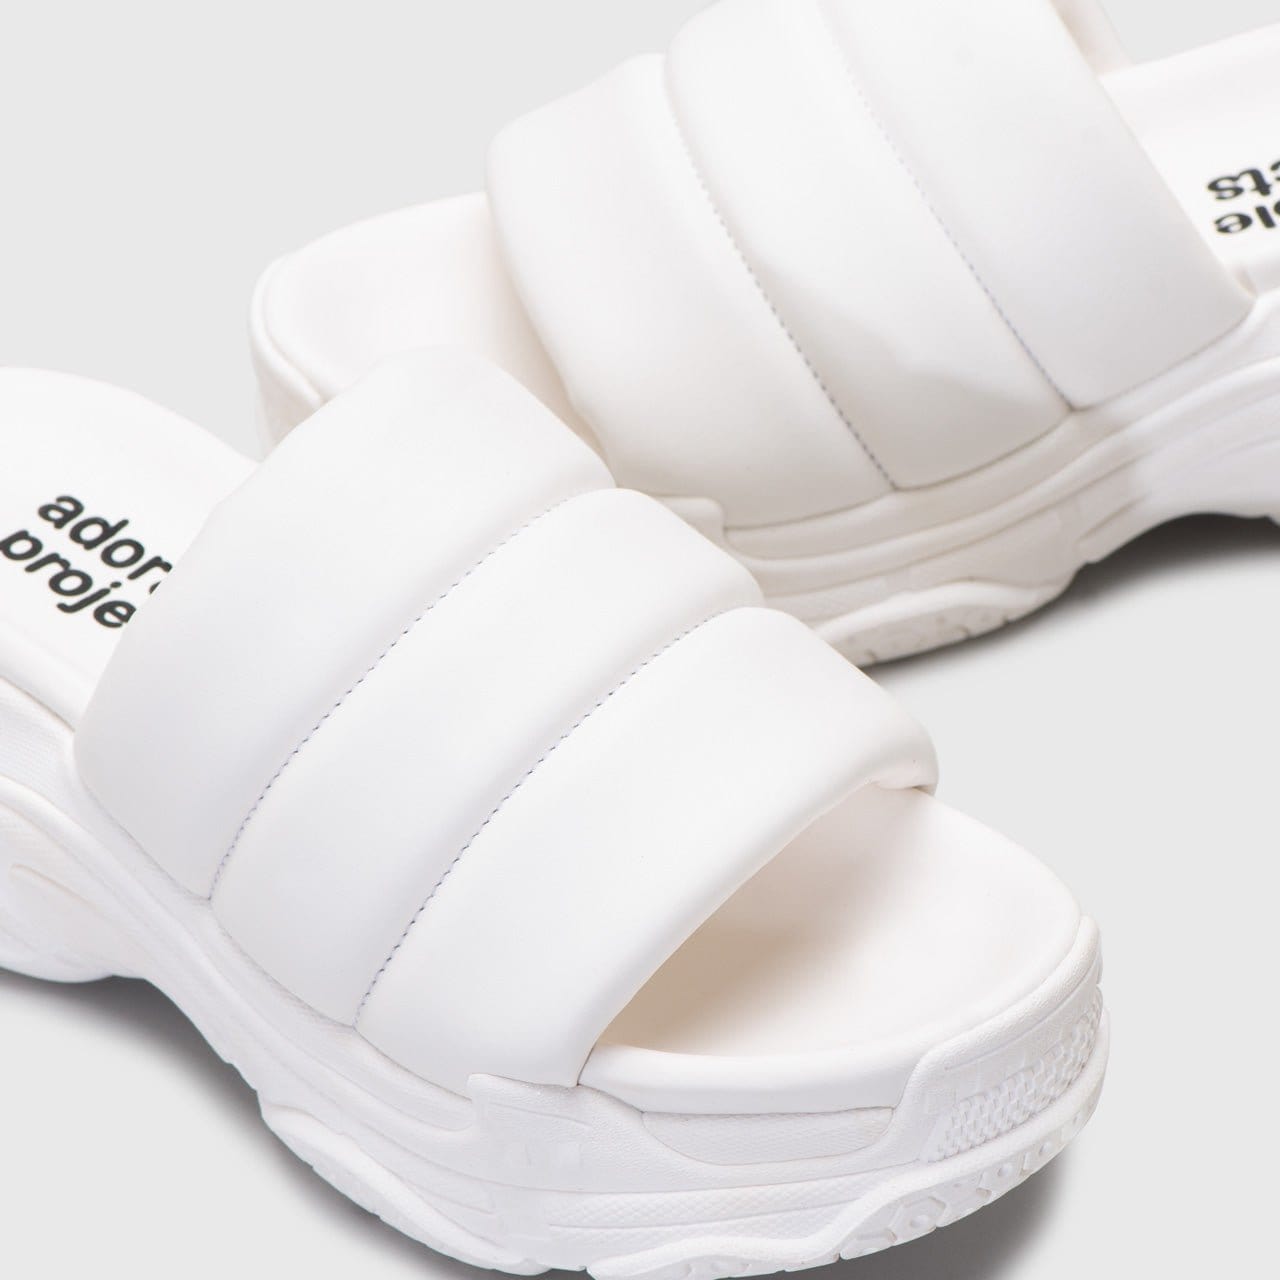 Adorable Projects Official Sandals Maligi Sandals White